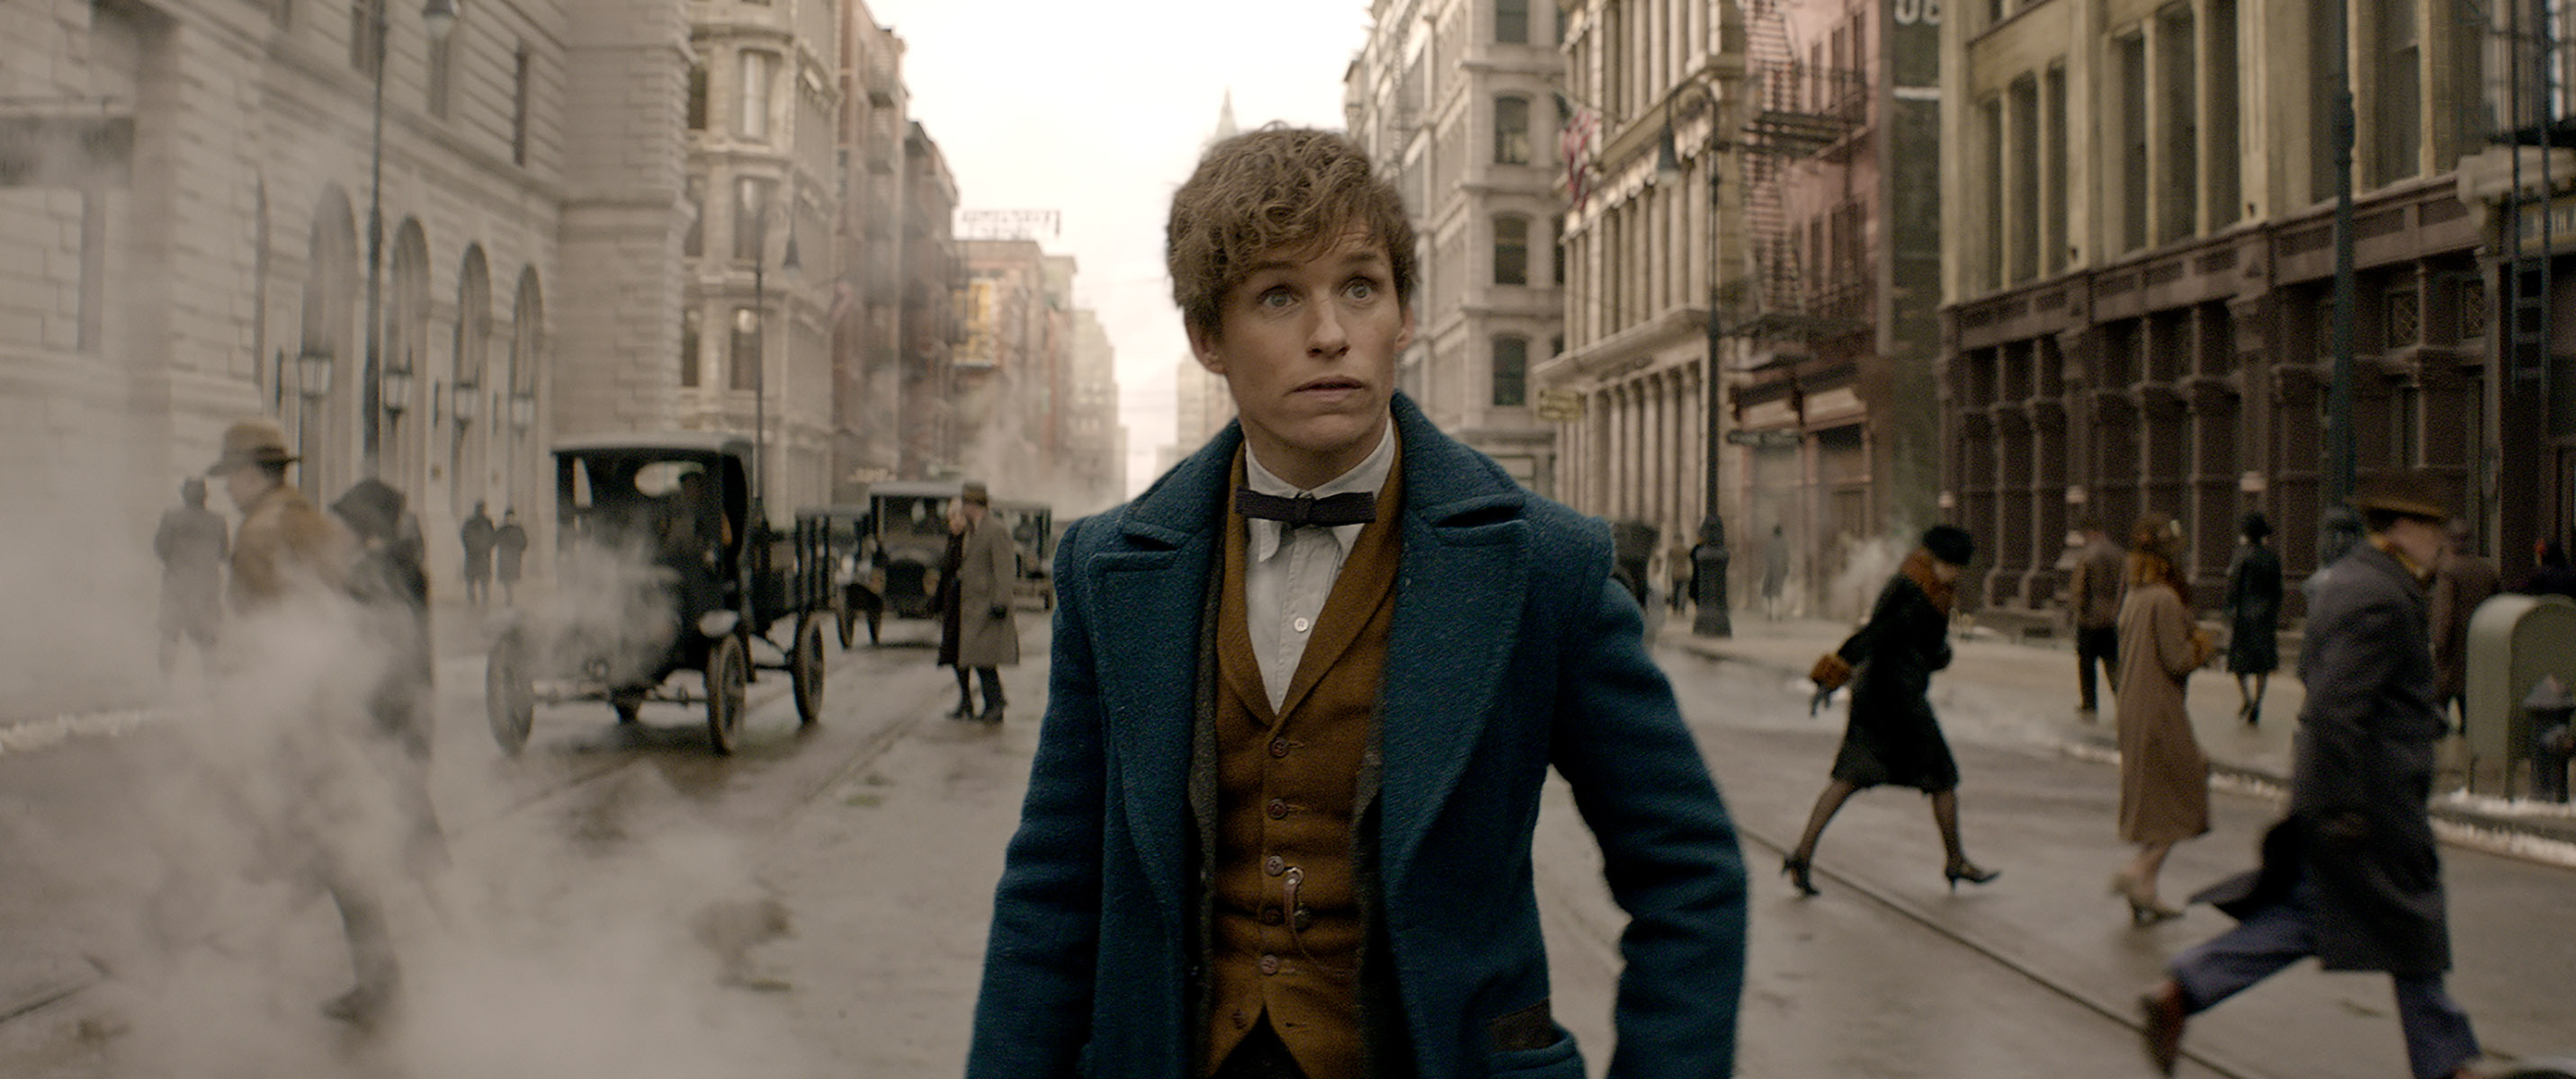 Film Fantastic Beasts And Where To Find Them 2016 Online Watch